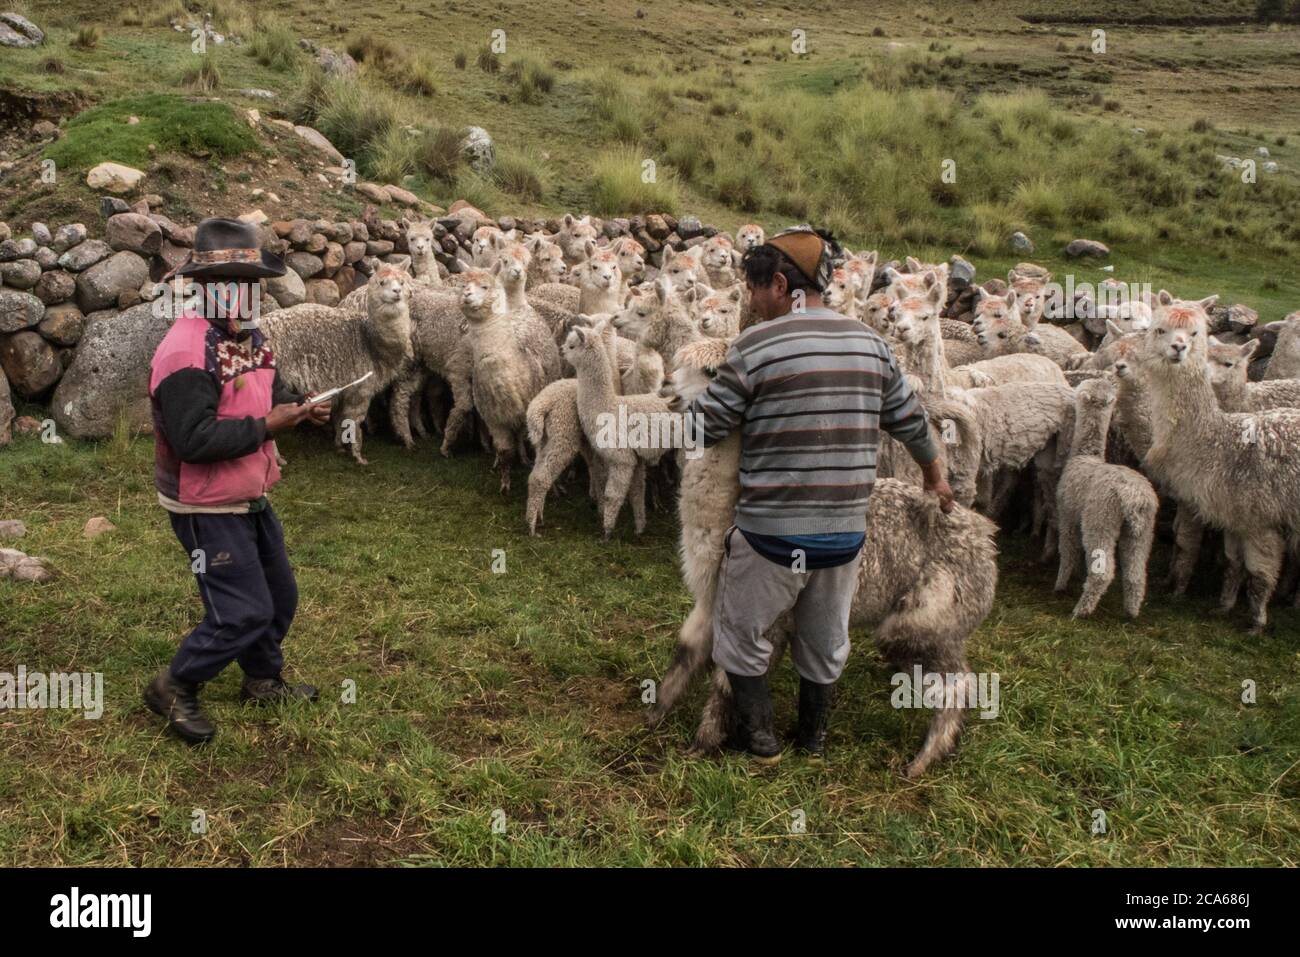 Herding alpaca in a Peruvian community in the Andes, getting them ready for a health check. Stock Photo